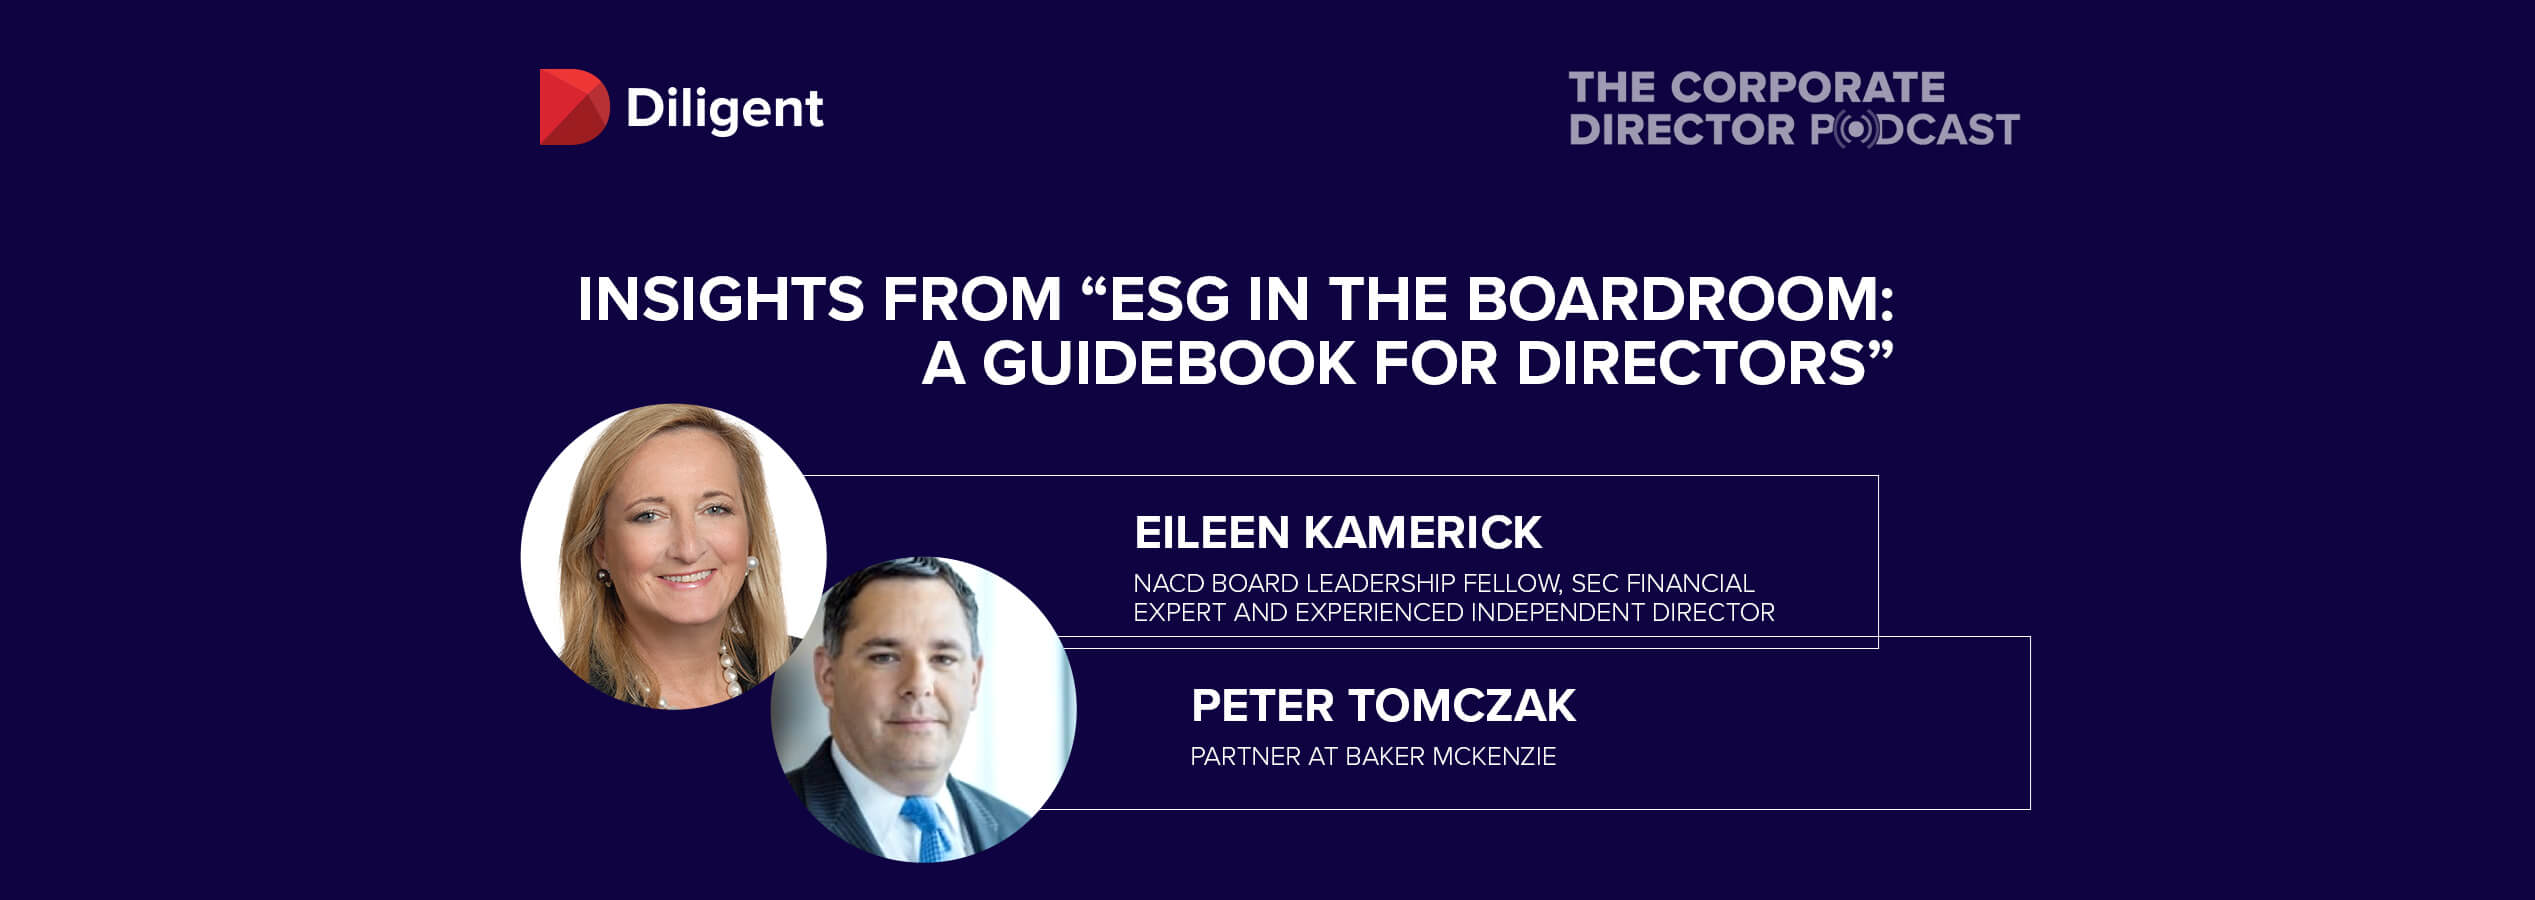 Insights from "ESG in the Boardroom: A Guidebook for Directors" episode cover